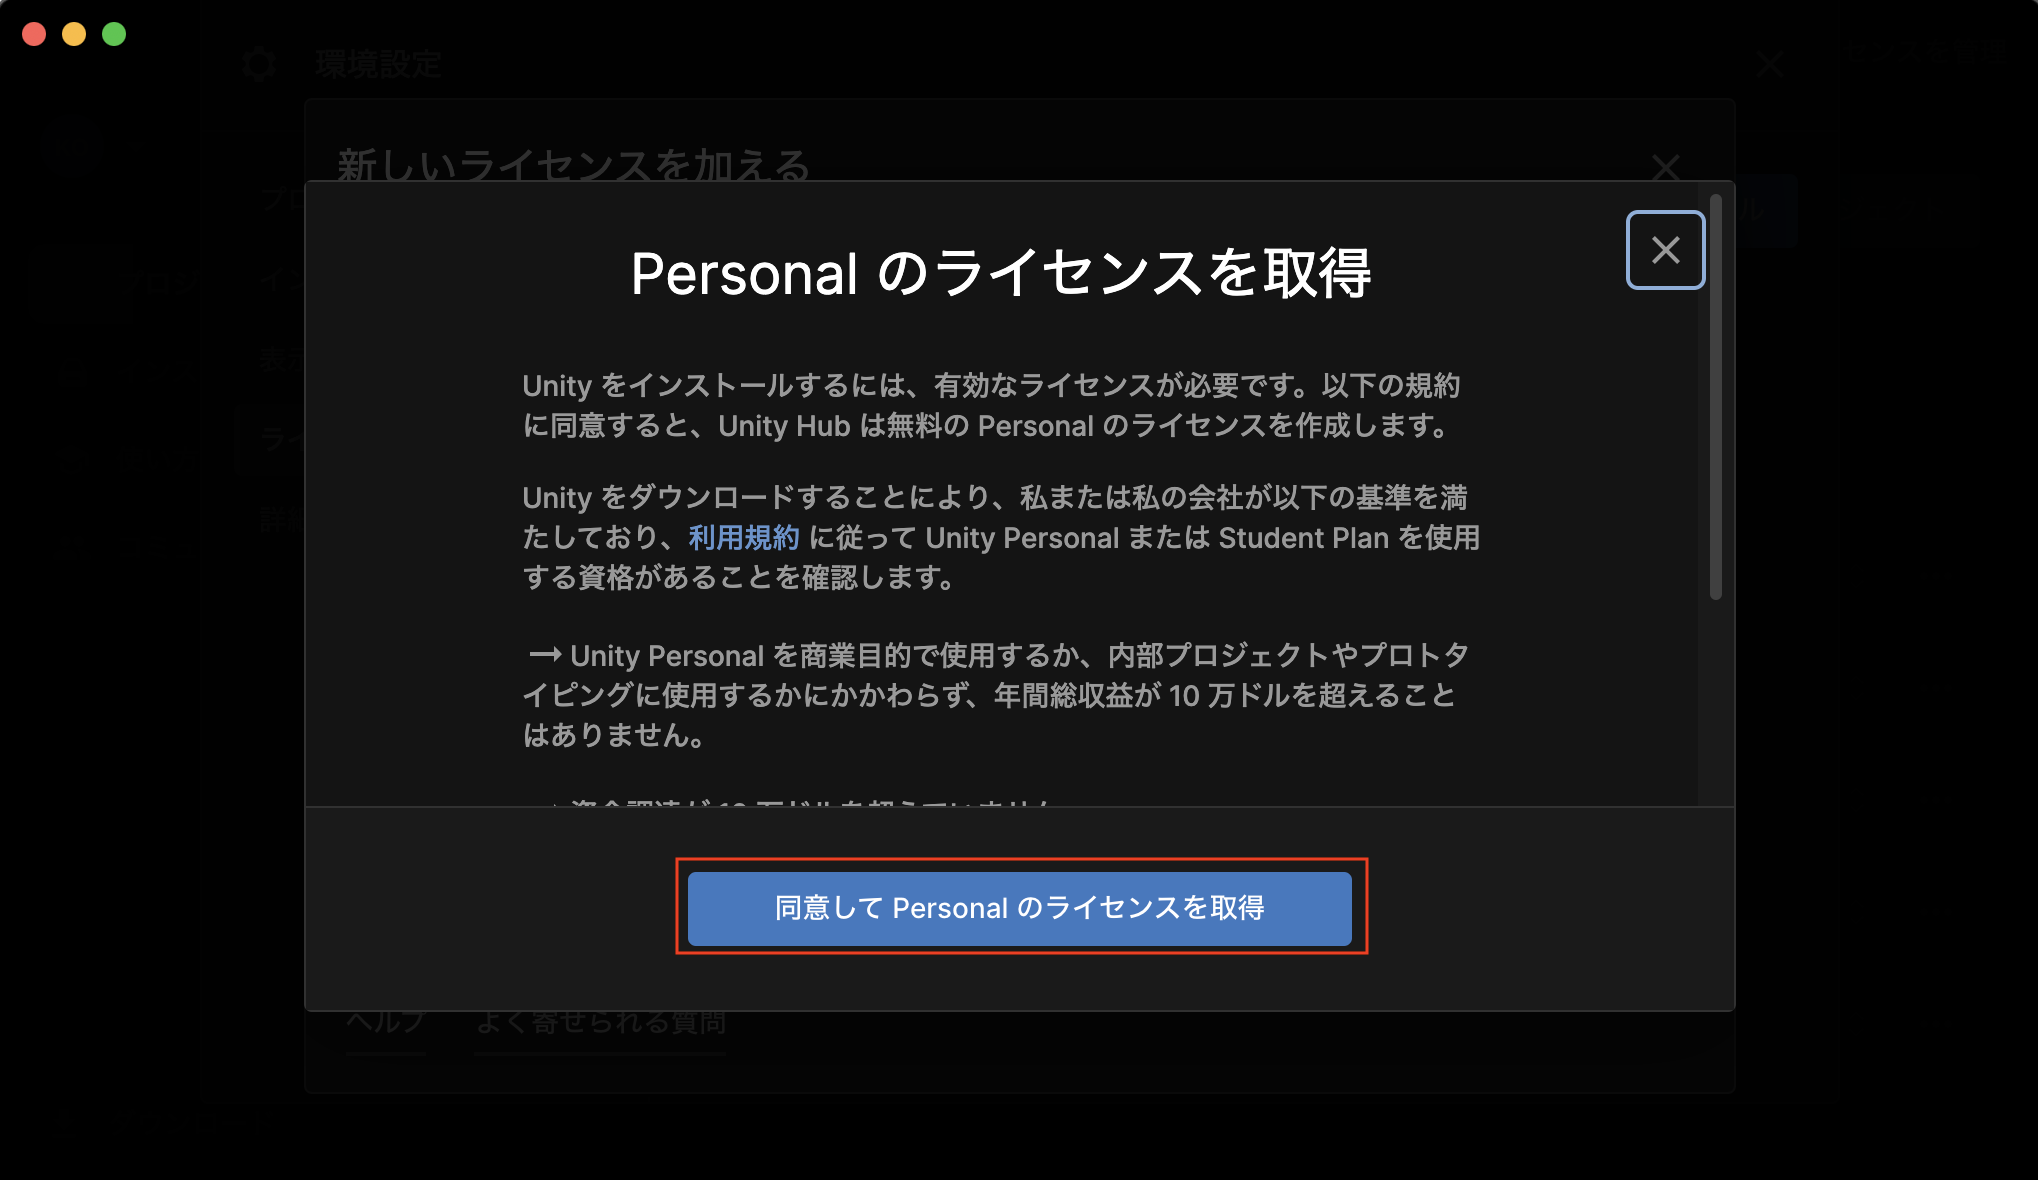 activate-license-JP-6.png